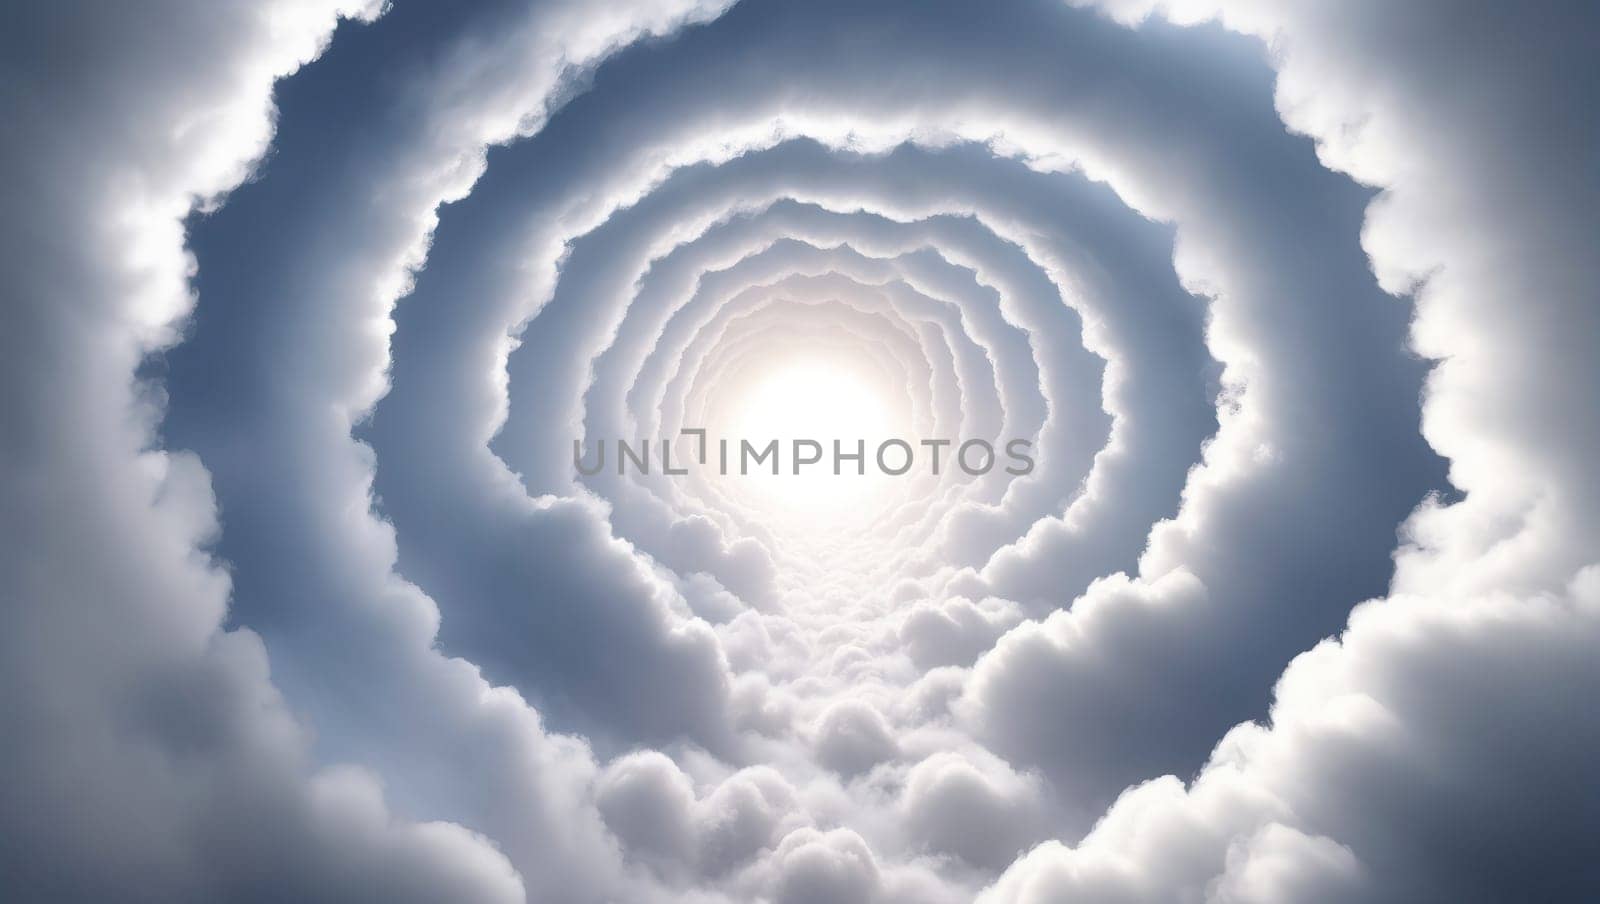 Inside a long tunnel of clouds by applesstock